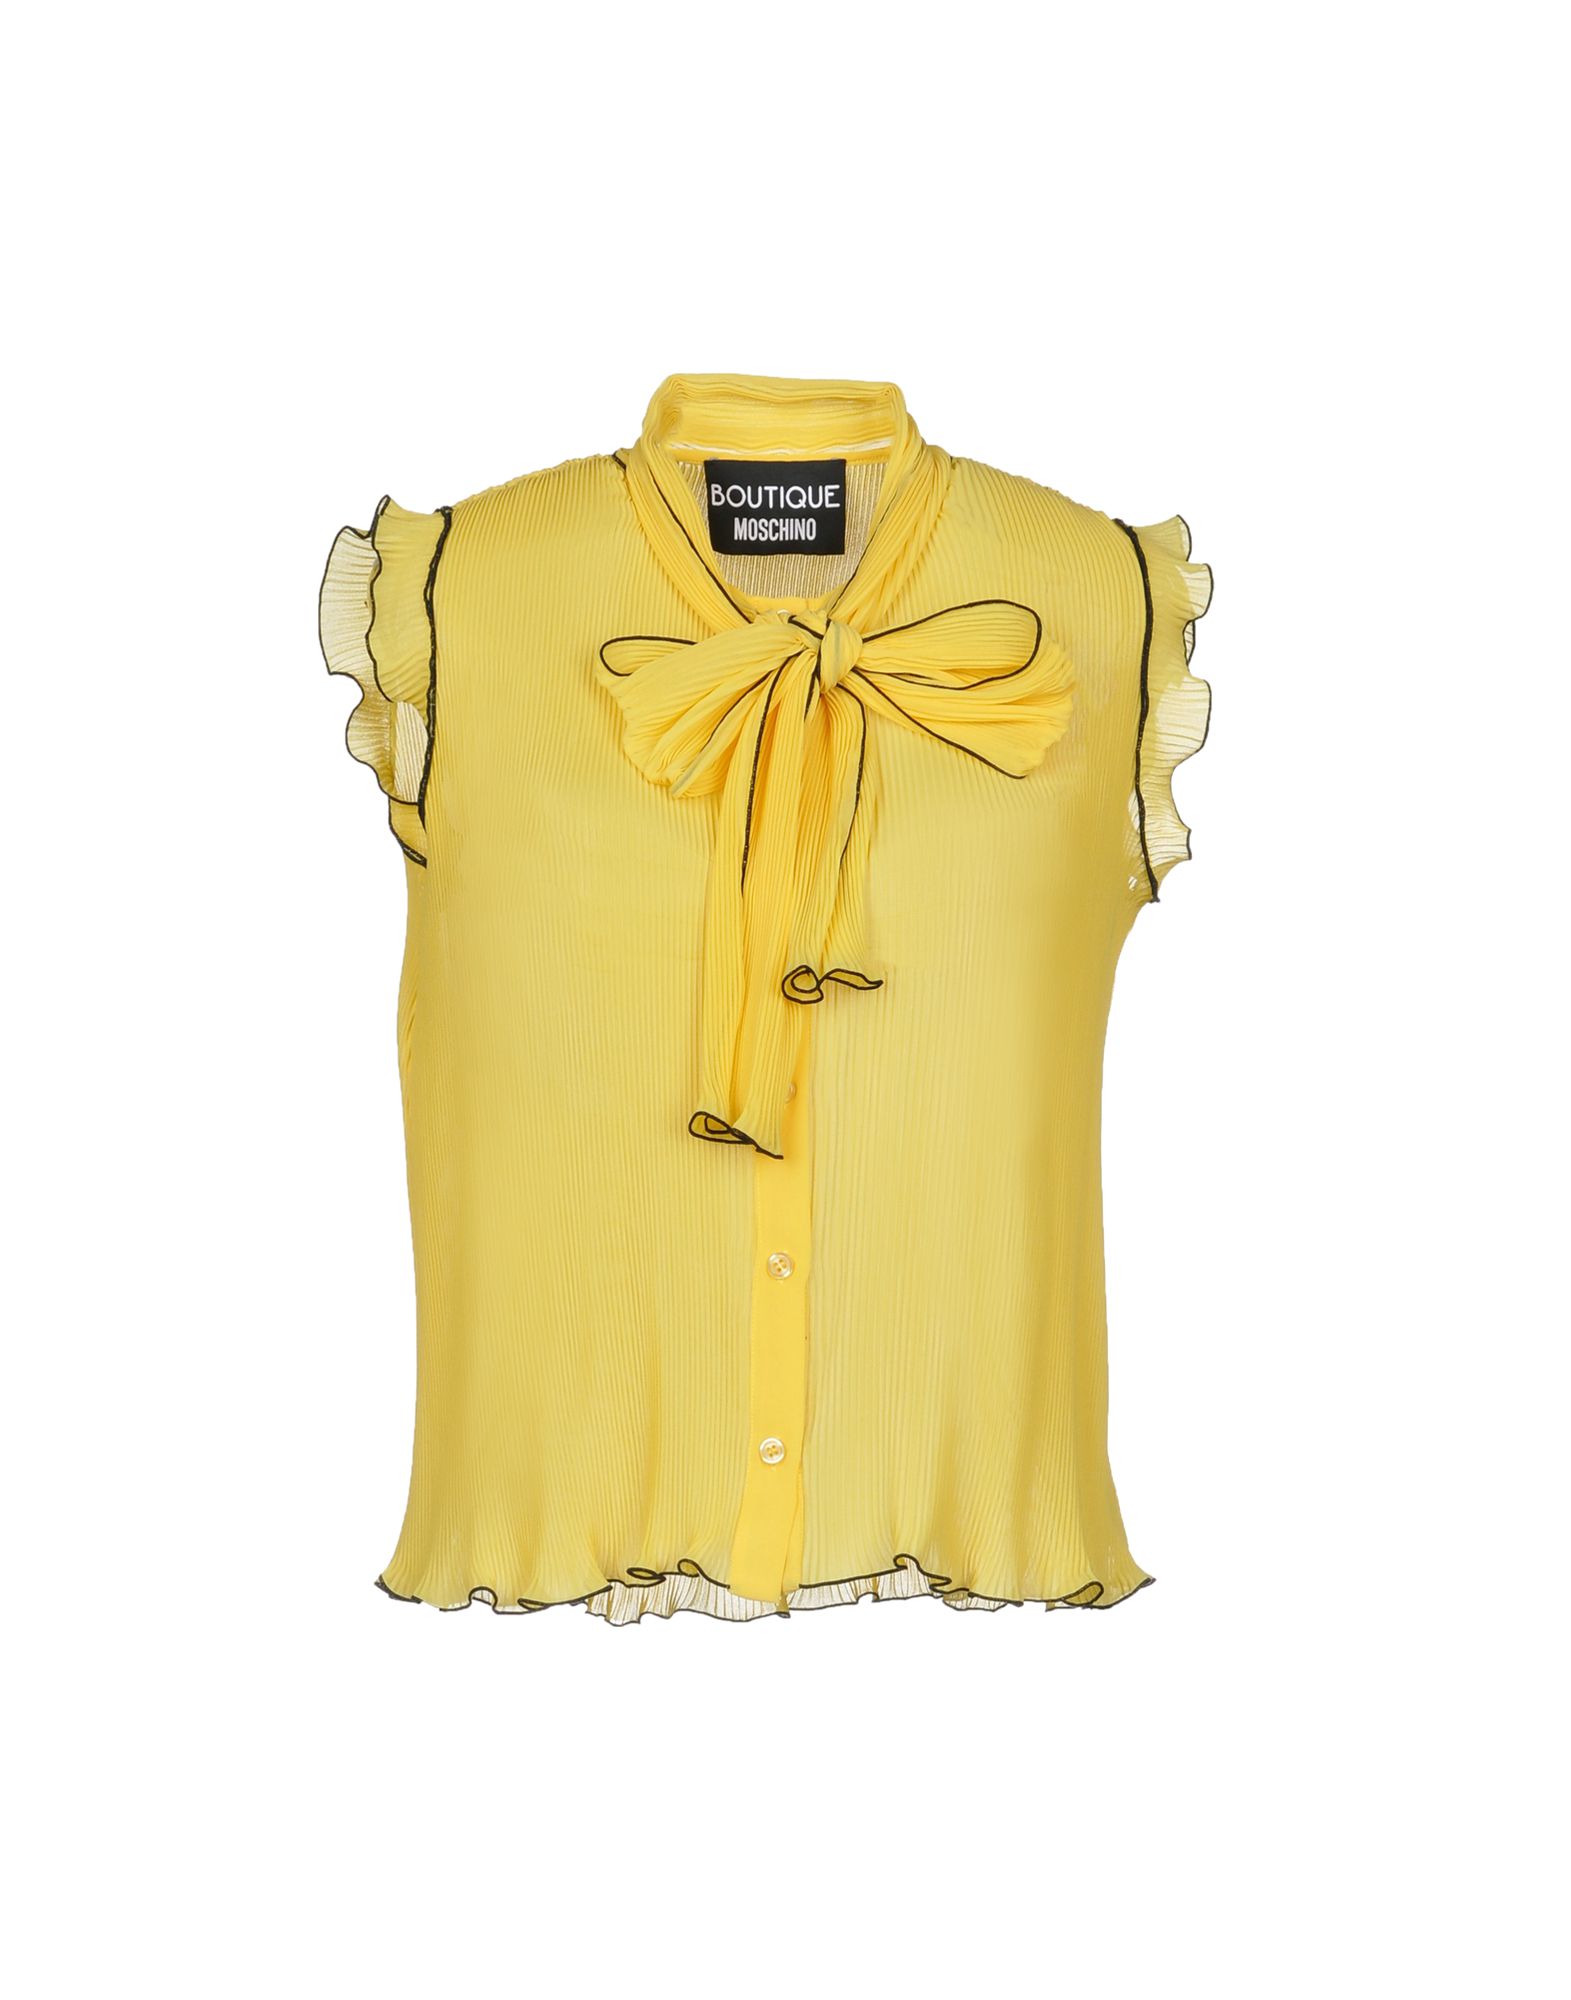 BOUTIQUE MOSCHINO Shirts & blouses with bow,38740064IW 6